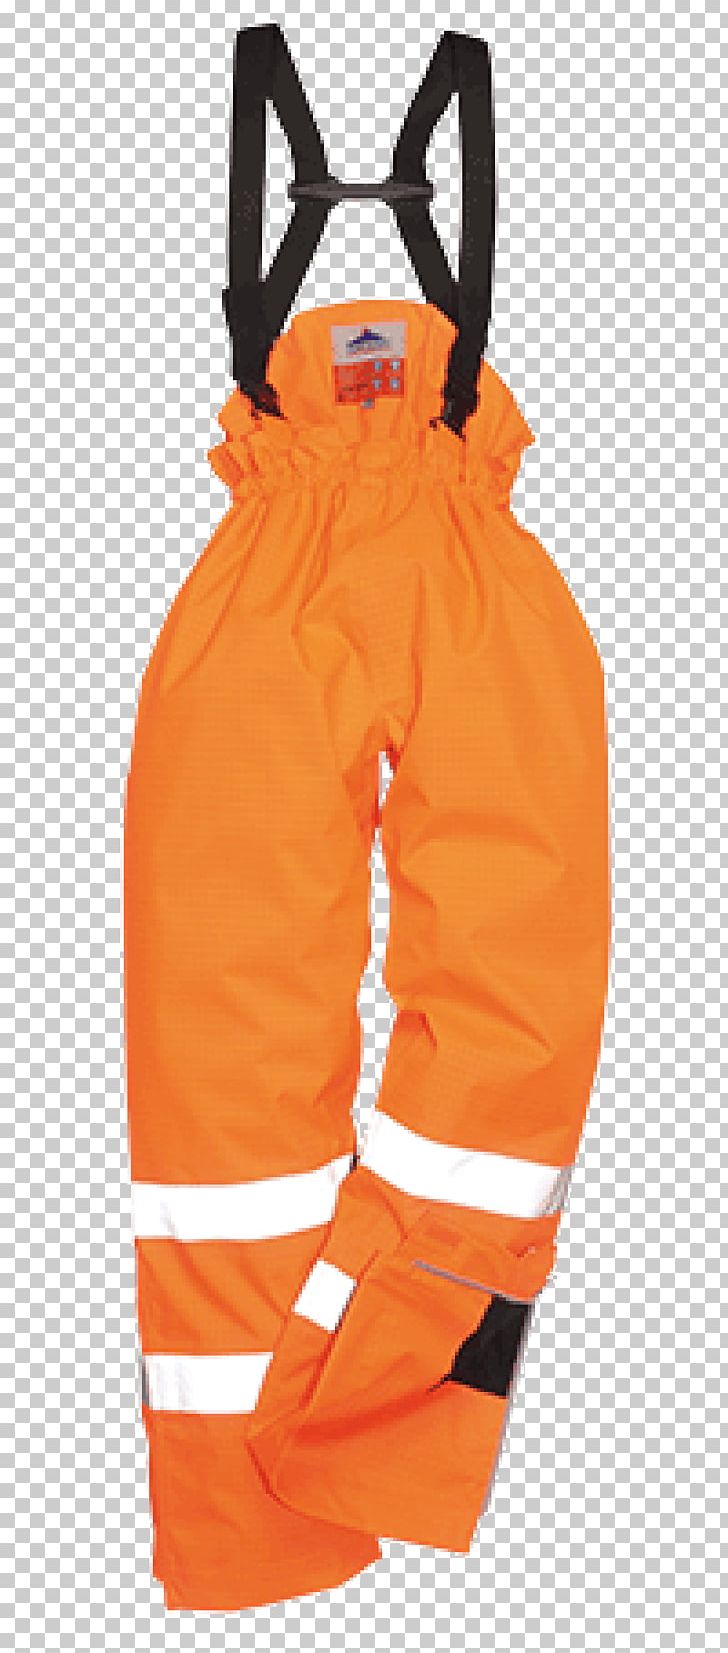 High-visibility Clothing Workwear Portwest Pants PNG, Clipart, Boilersuit, Braces, Clothing, Dickies, Flame Retardant Free PNG Download